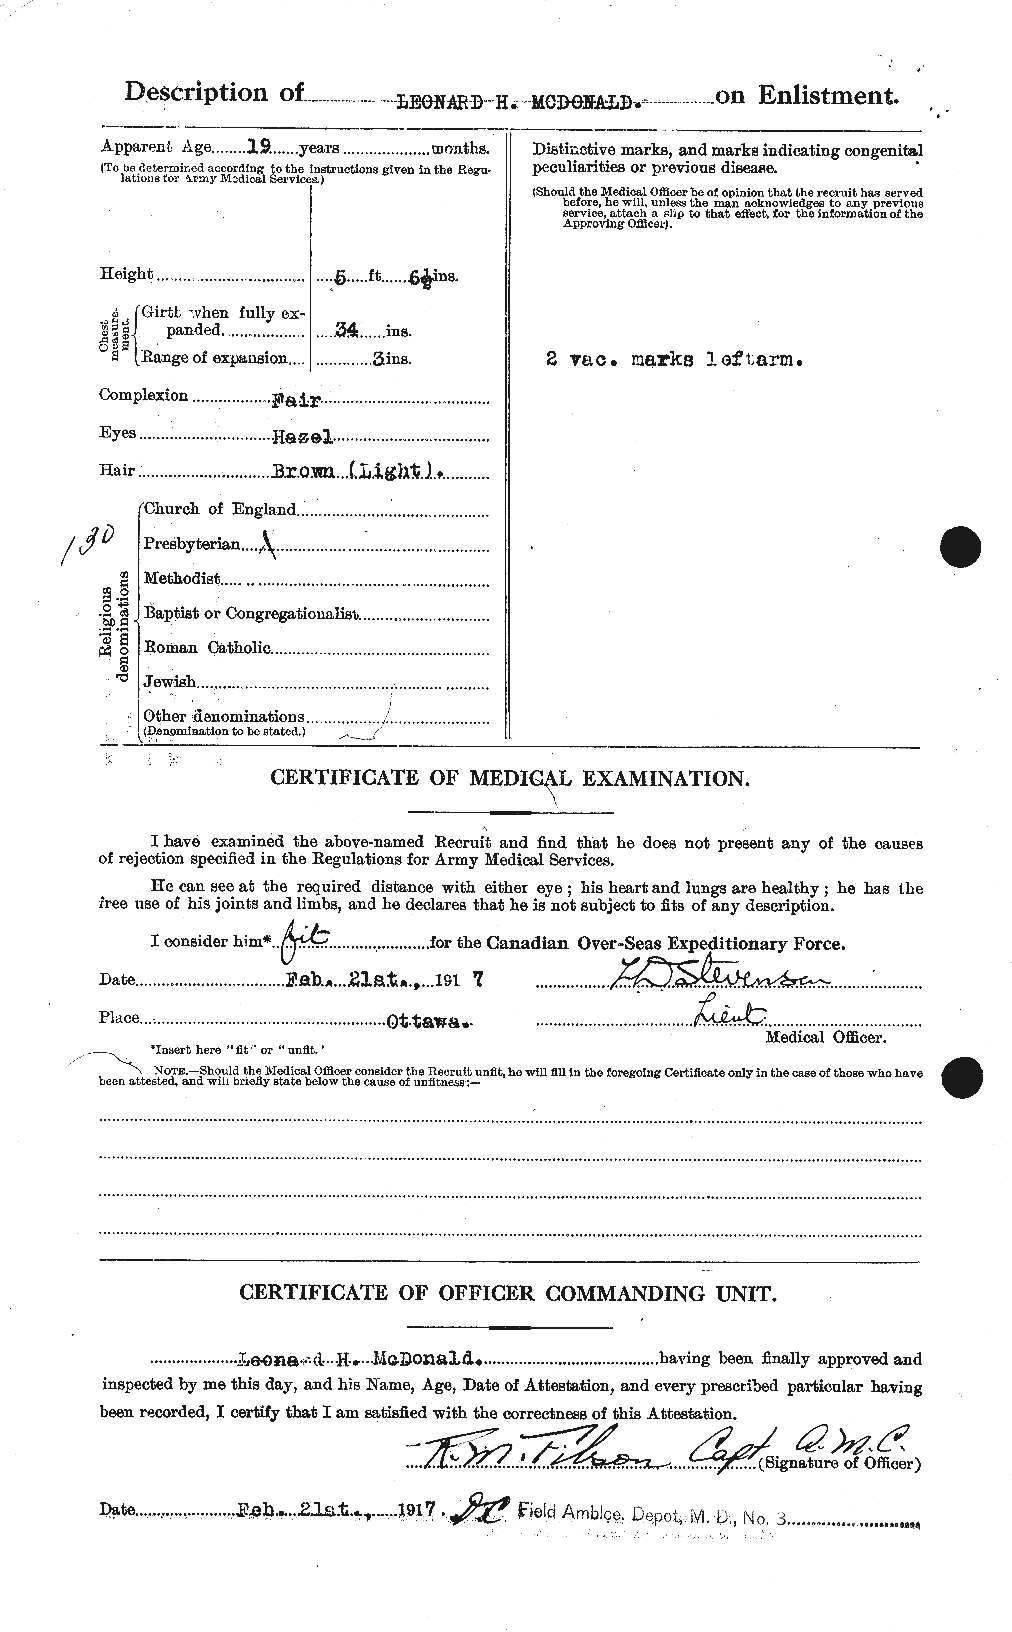 Personnel Records of the First World War - CEF 519781b